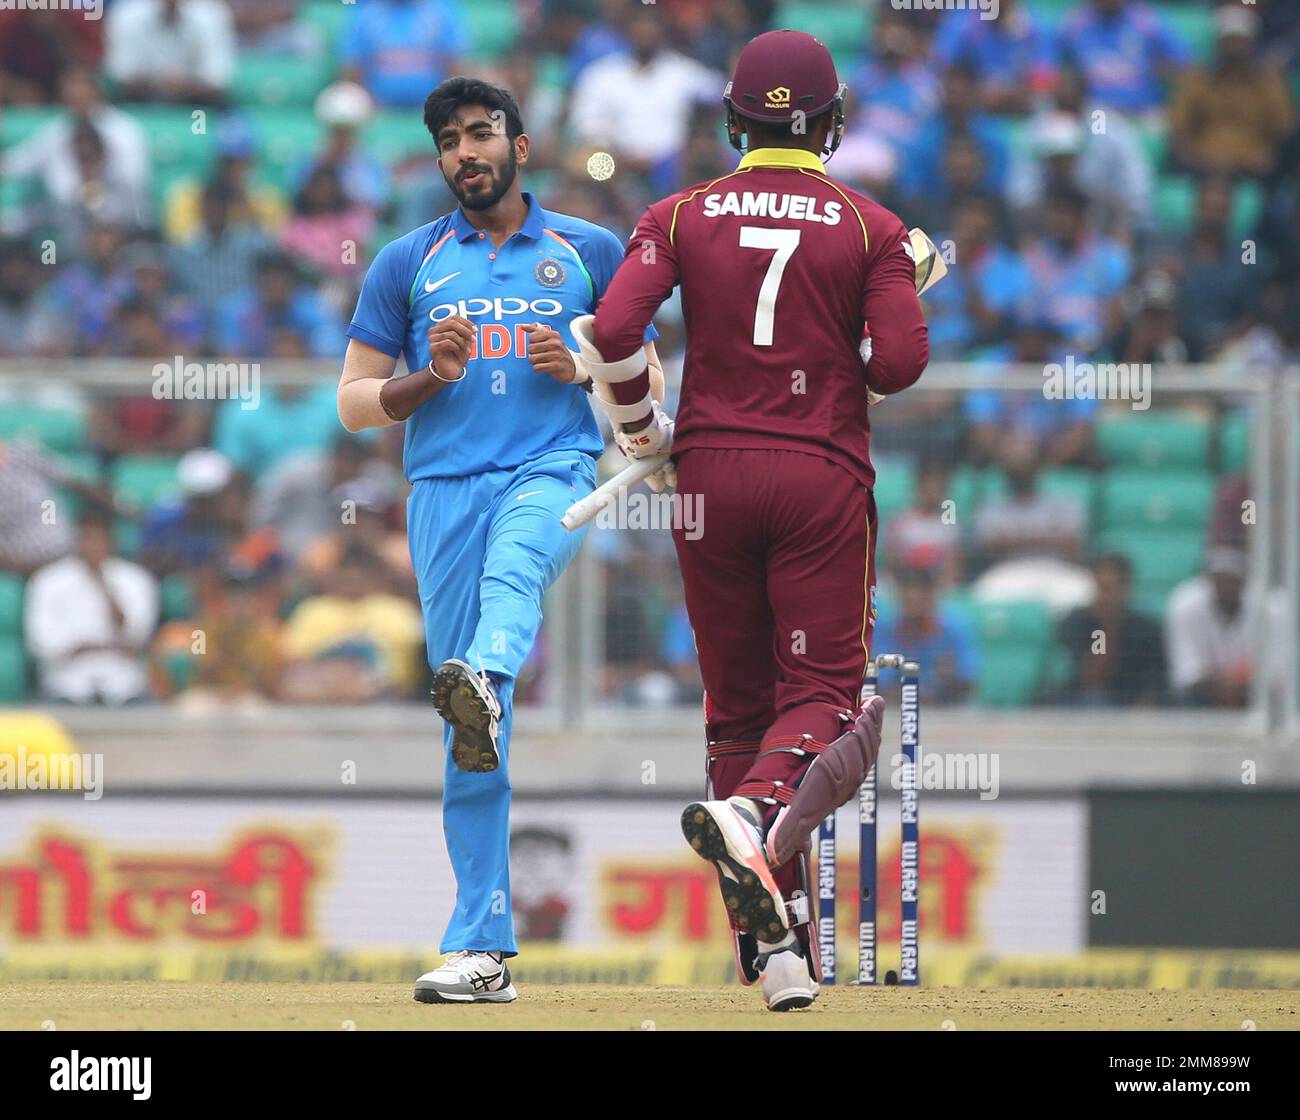 Indias Jasprit Bumrah, left, reacts after bowling a delivery to West Indies Marlon Samuels, right, during the fifth and last one-day international cricket match between India and West Indies in Thiruvananthapuram, India,